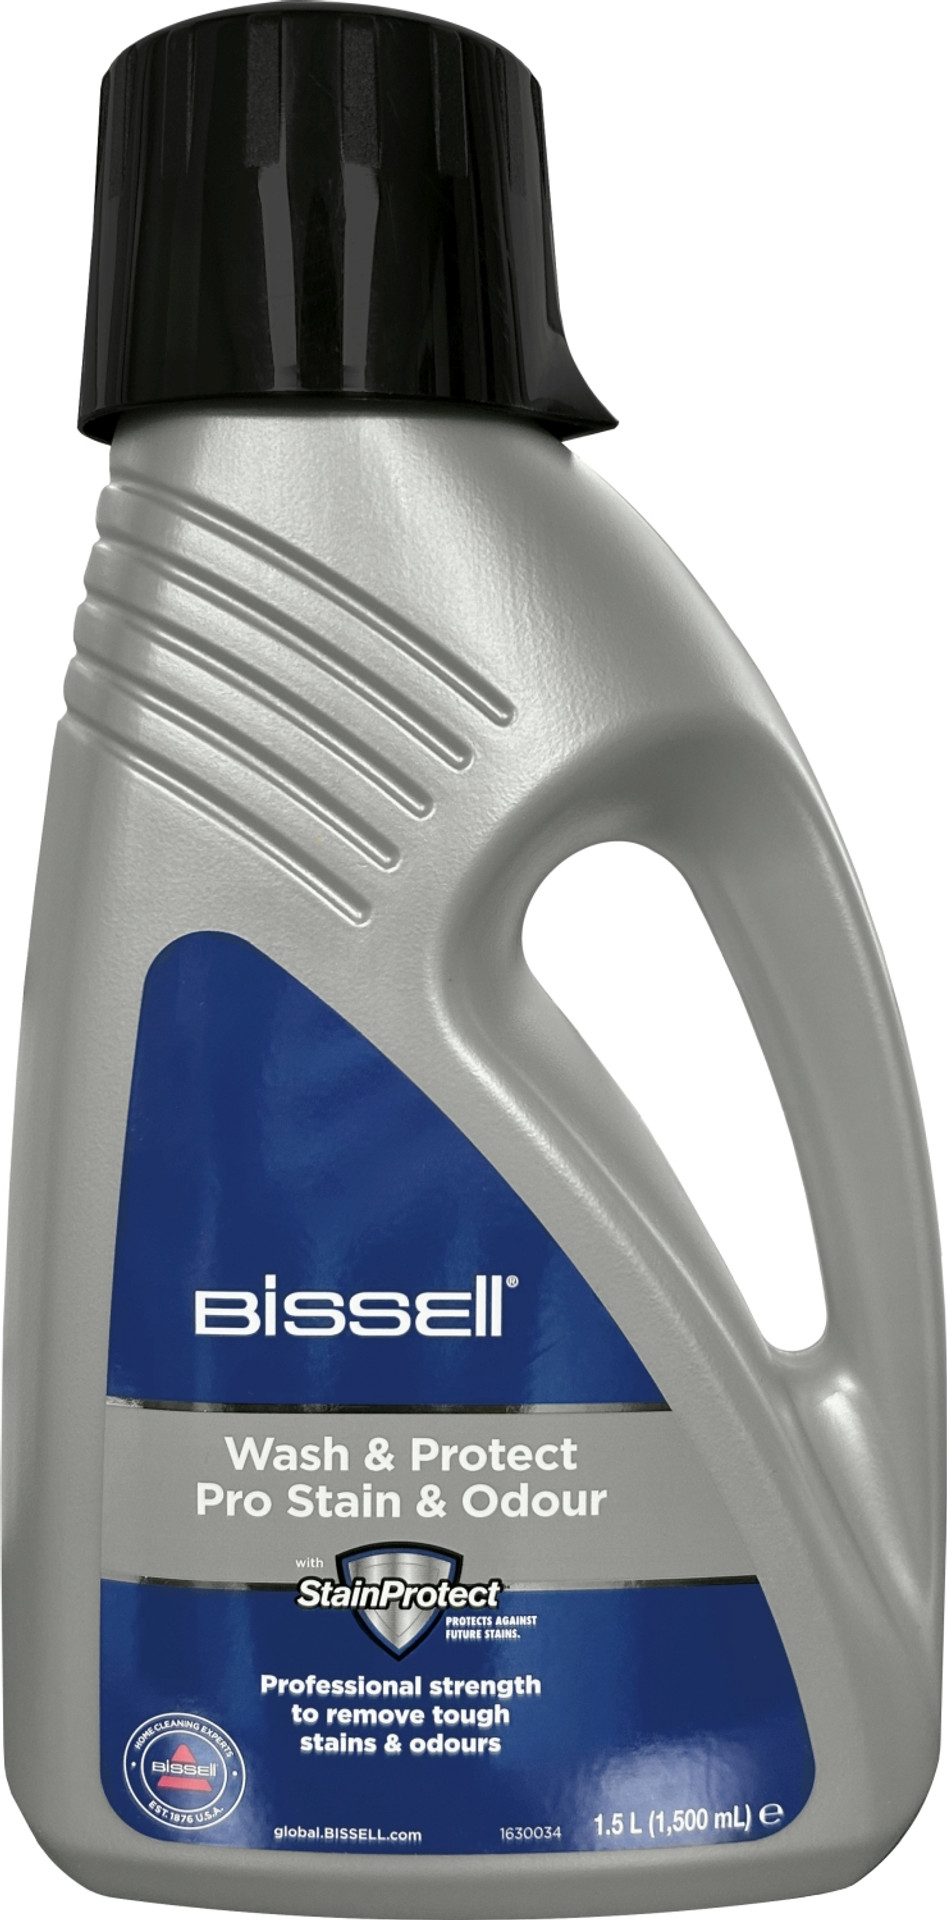 Wash & Protect - Stain & Odour 1.5L - BISSELL International